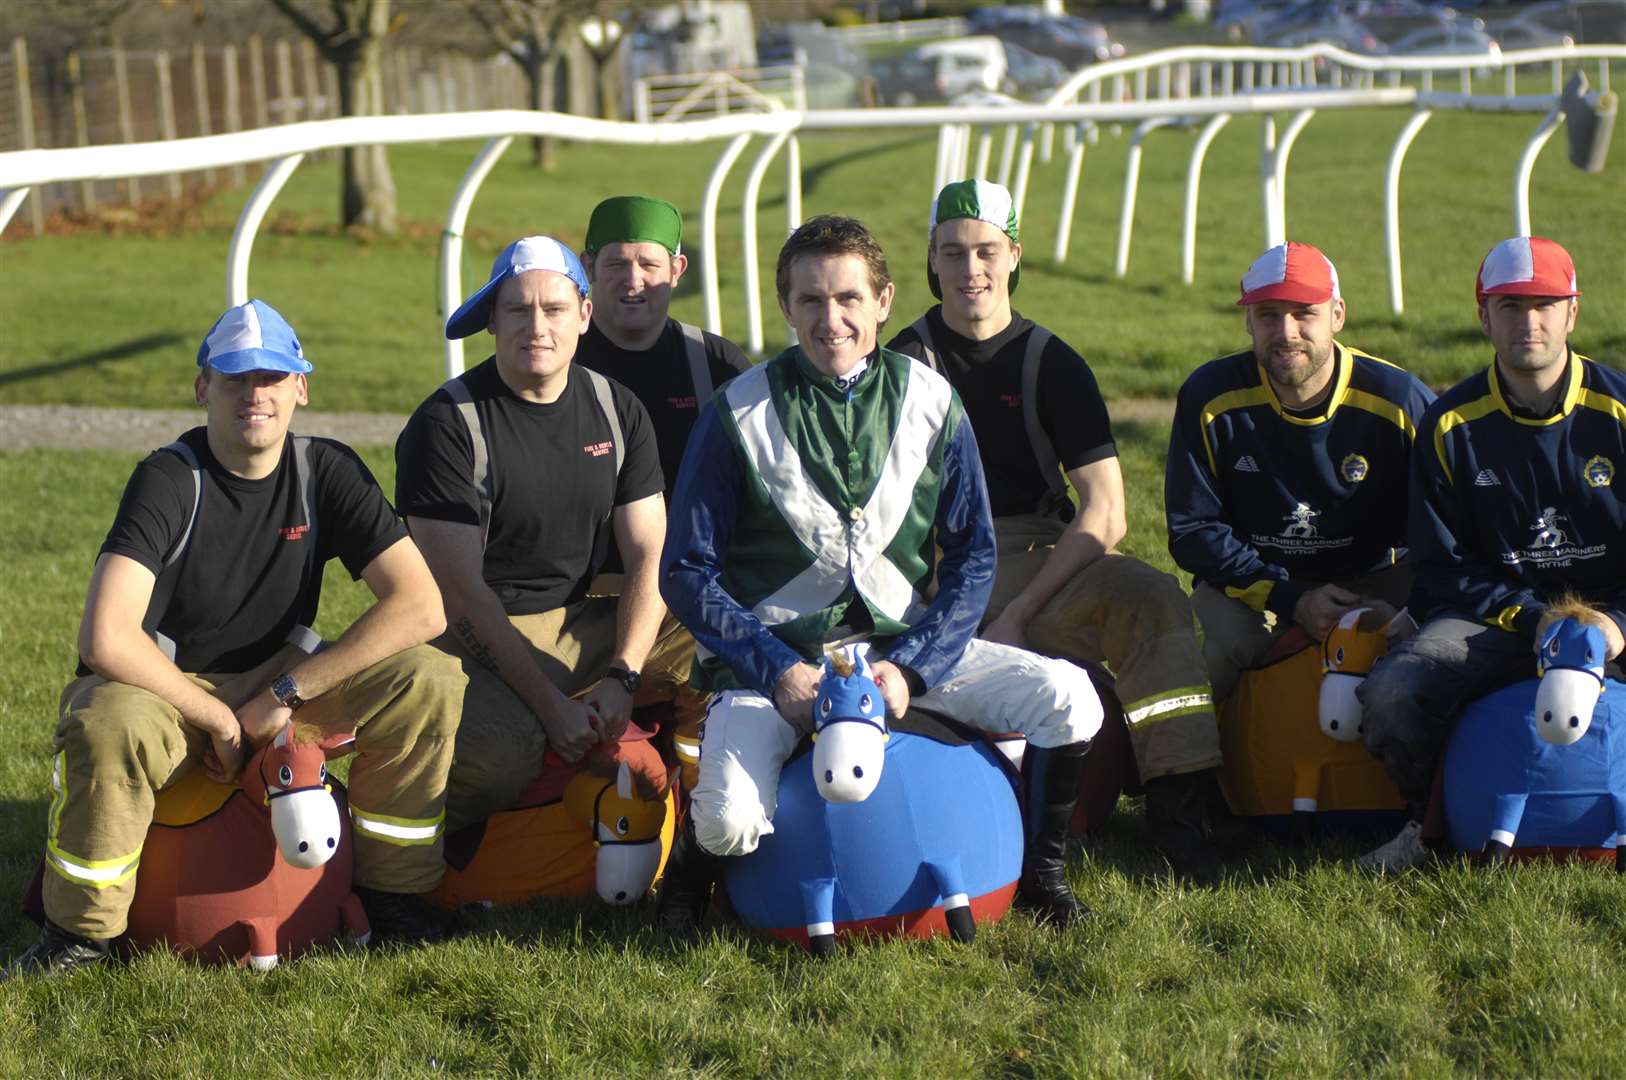 Firefighters from Hythe station and locals from The Three Mariners pub race on spacehoppers with champion jockey Tony McCoy in November 2010